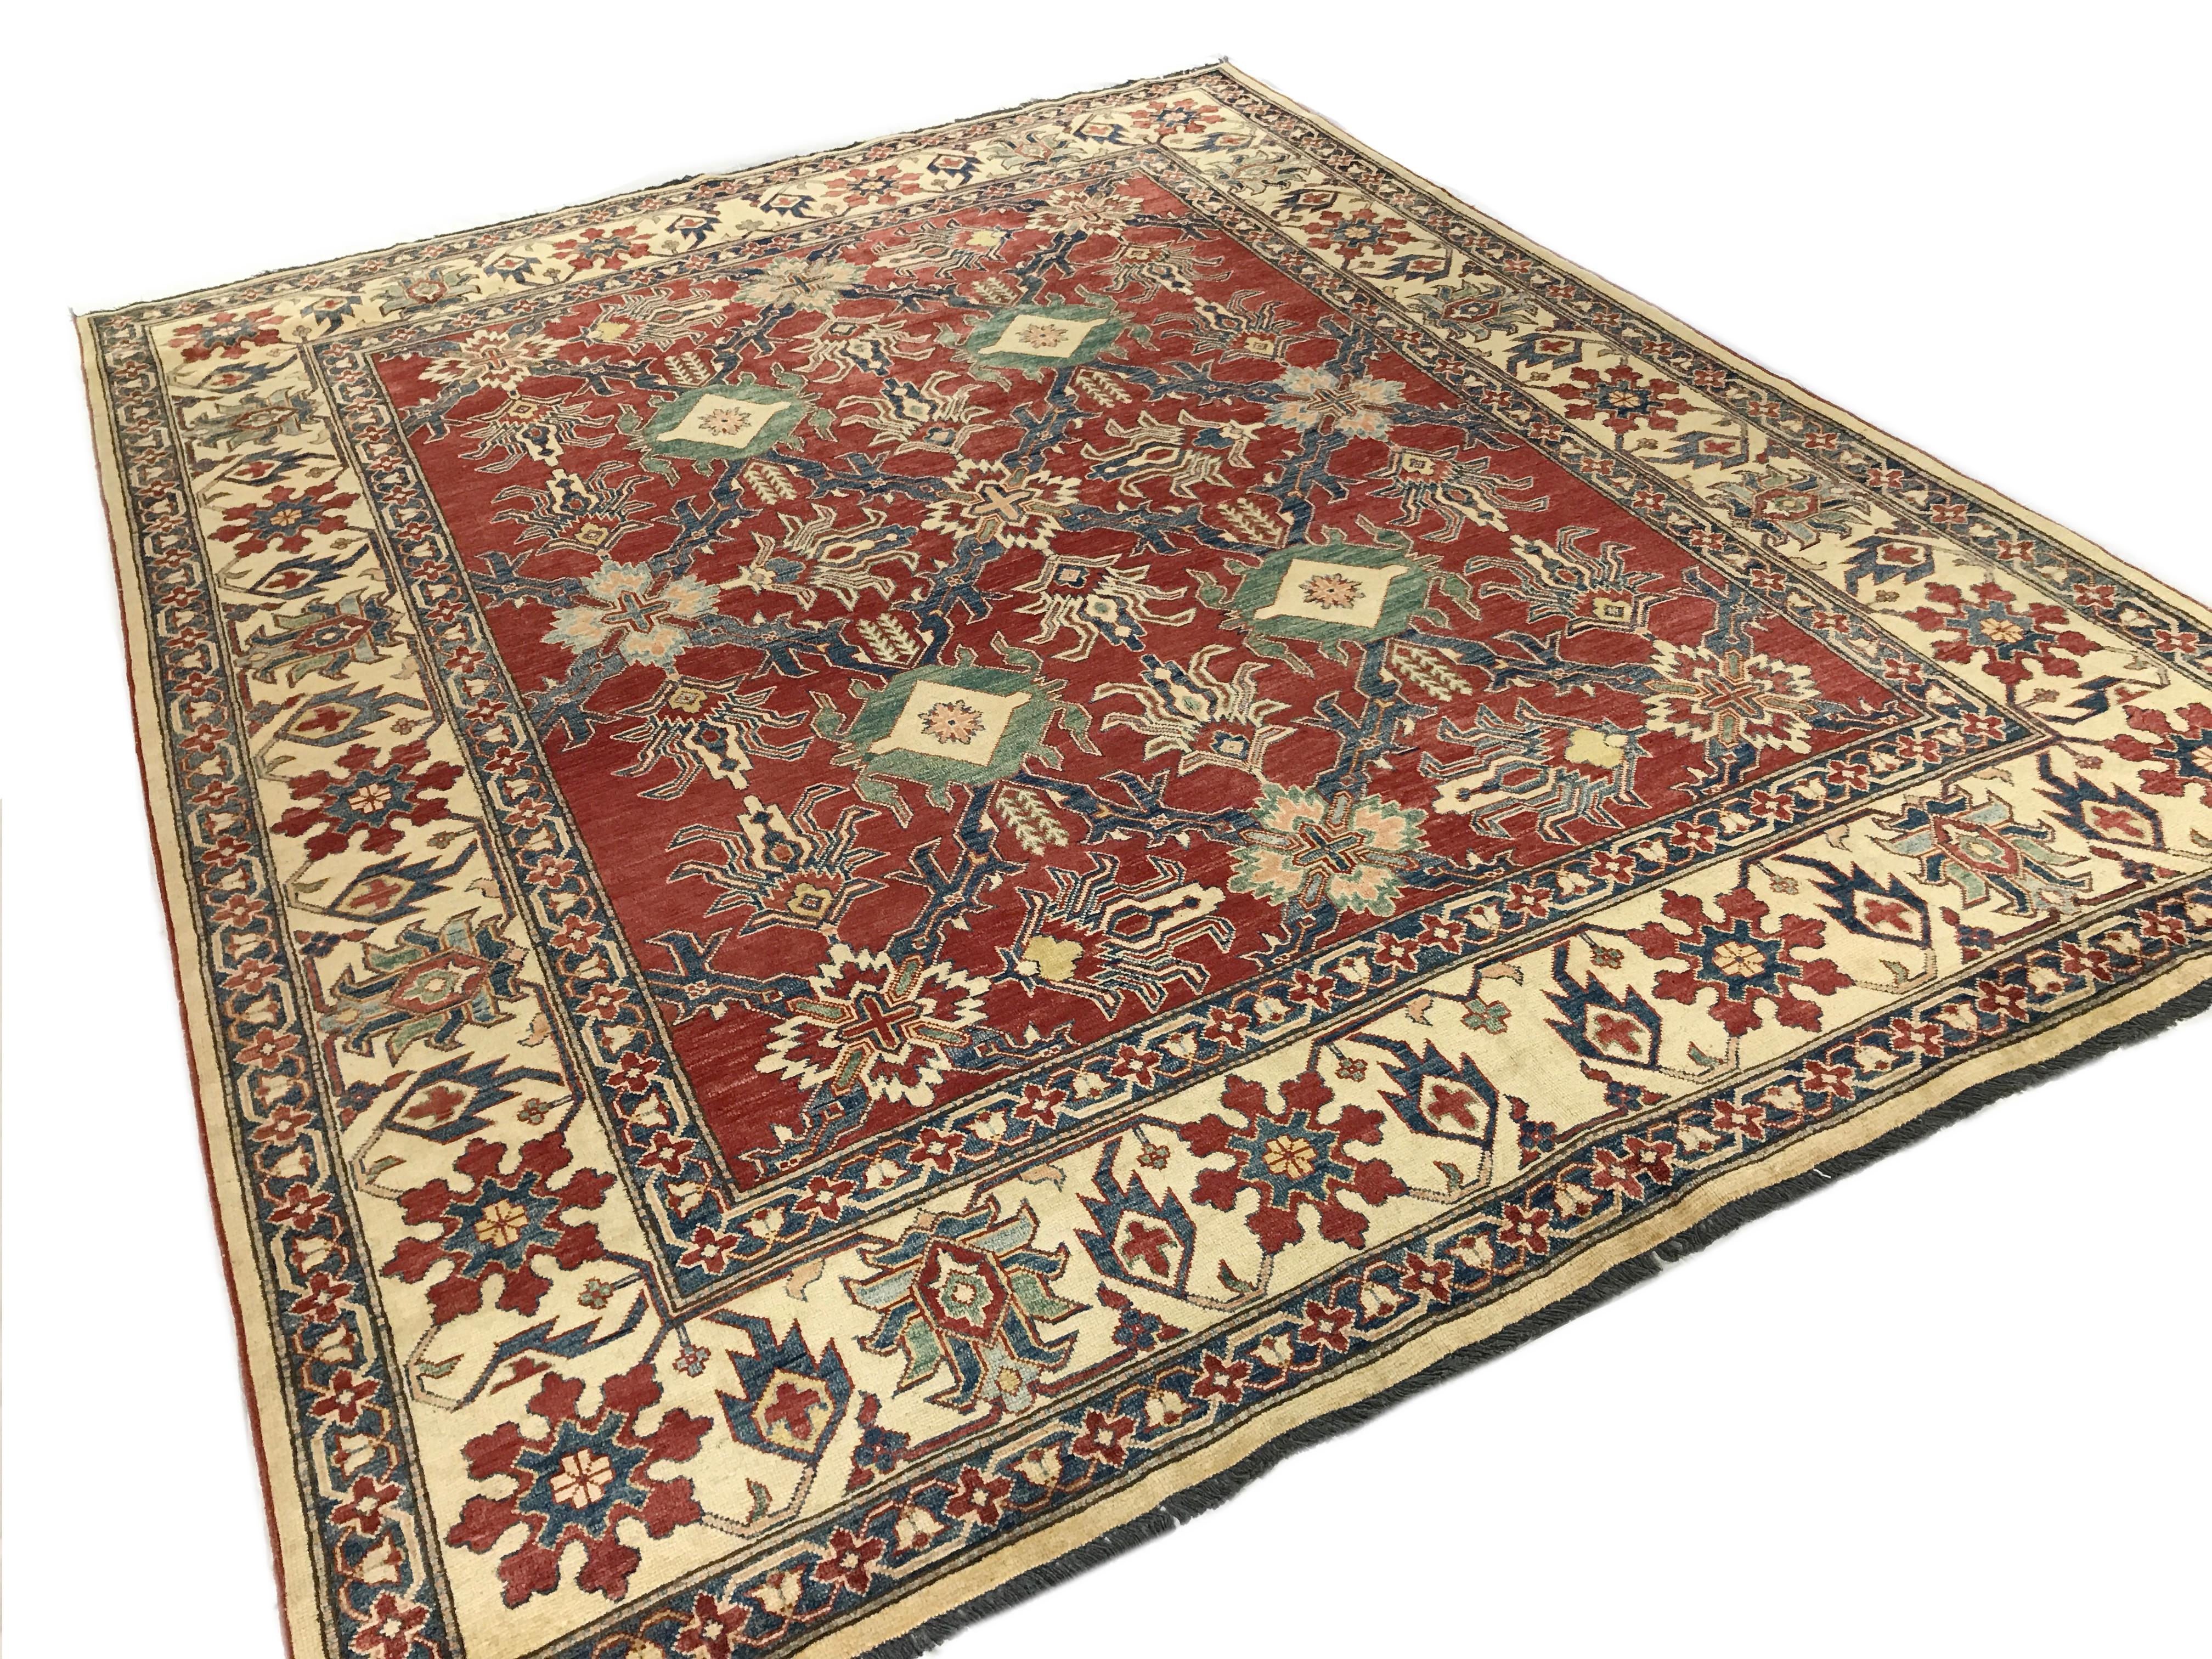 Red and blue traditional wool area rug - 8'1